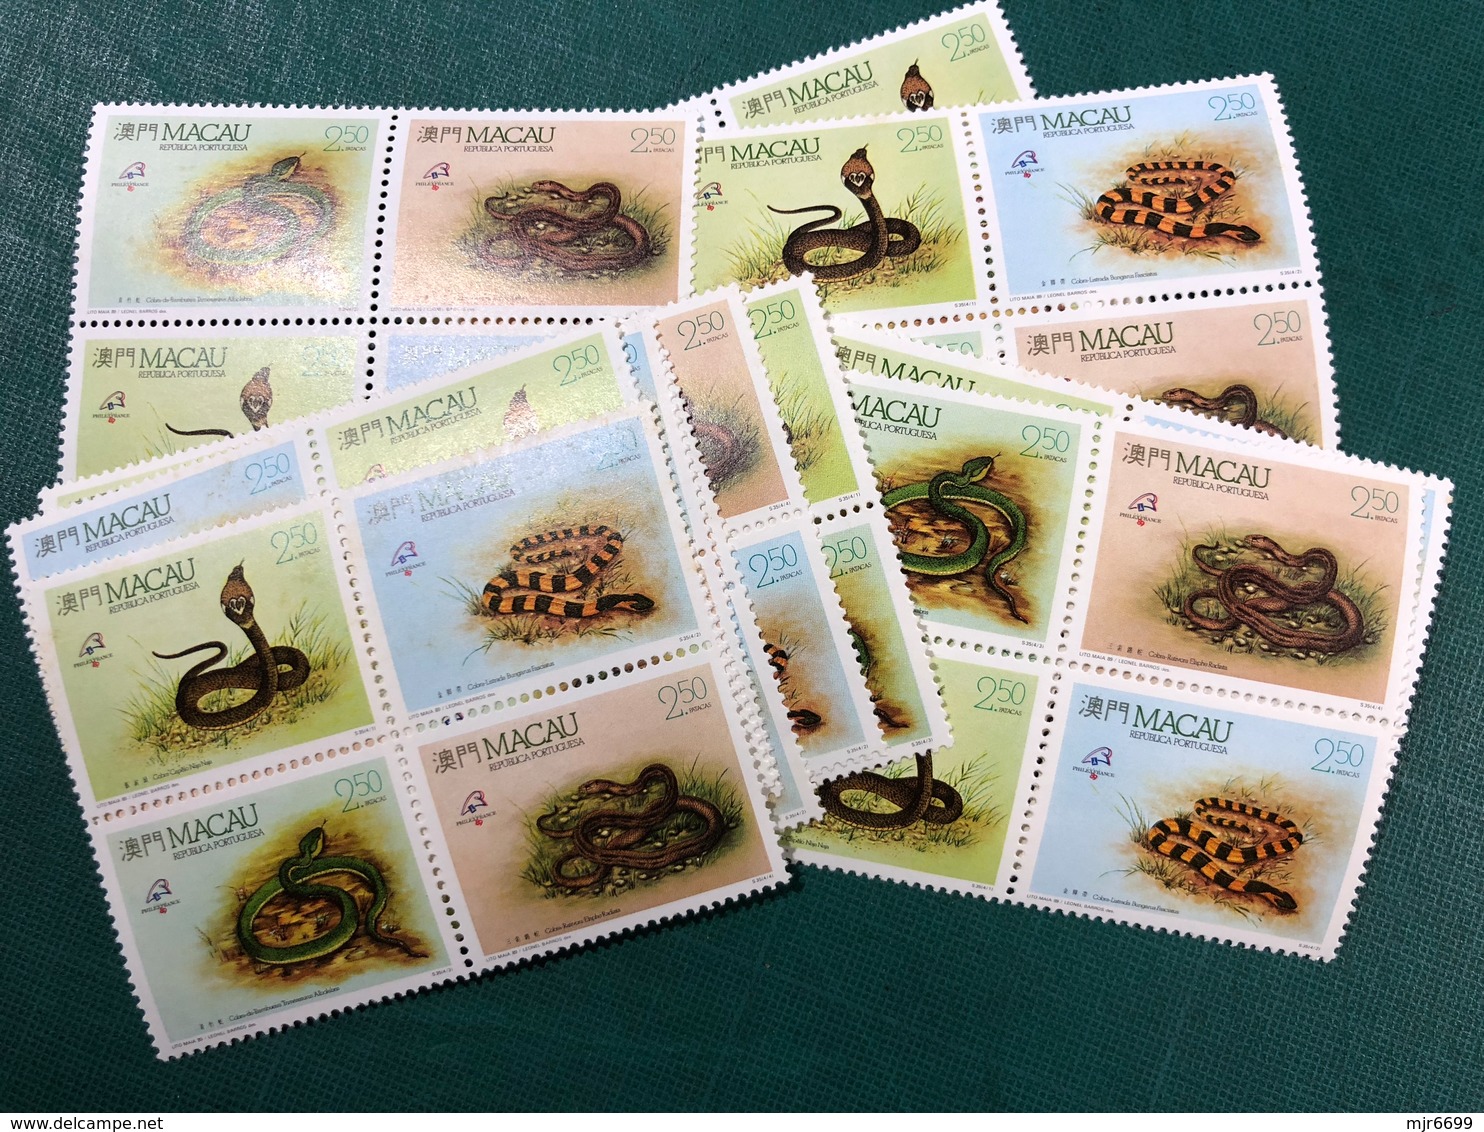 MACAU 1989 - SNAKES  - 1 SET IN BLOCK OF 4, UM VF - Collections, Lots & Séries